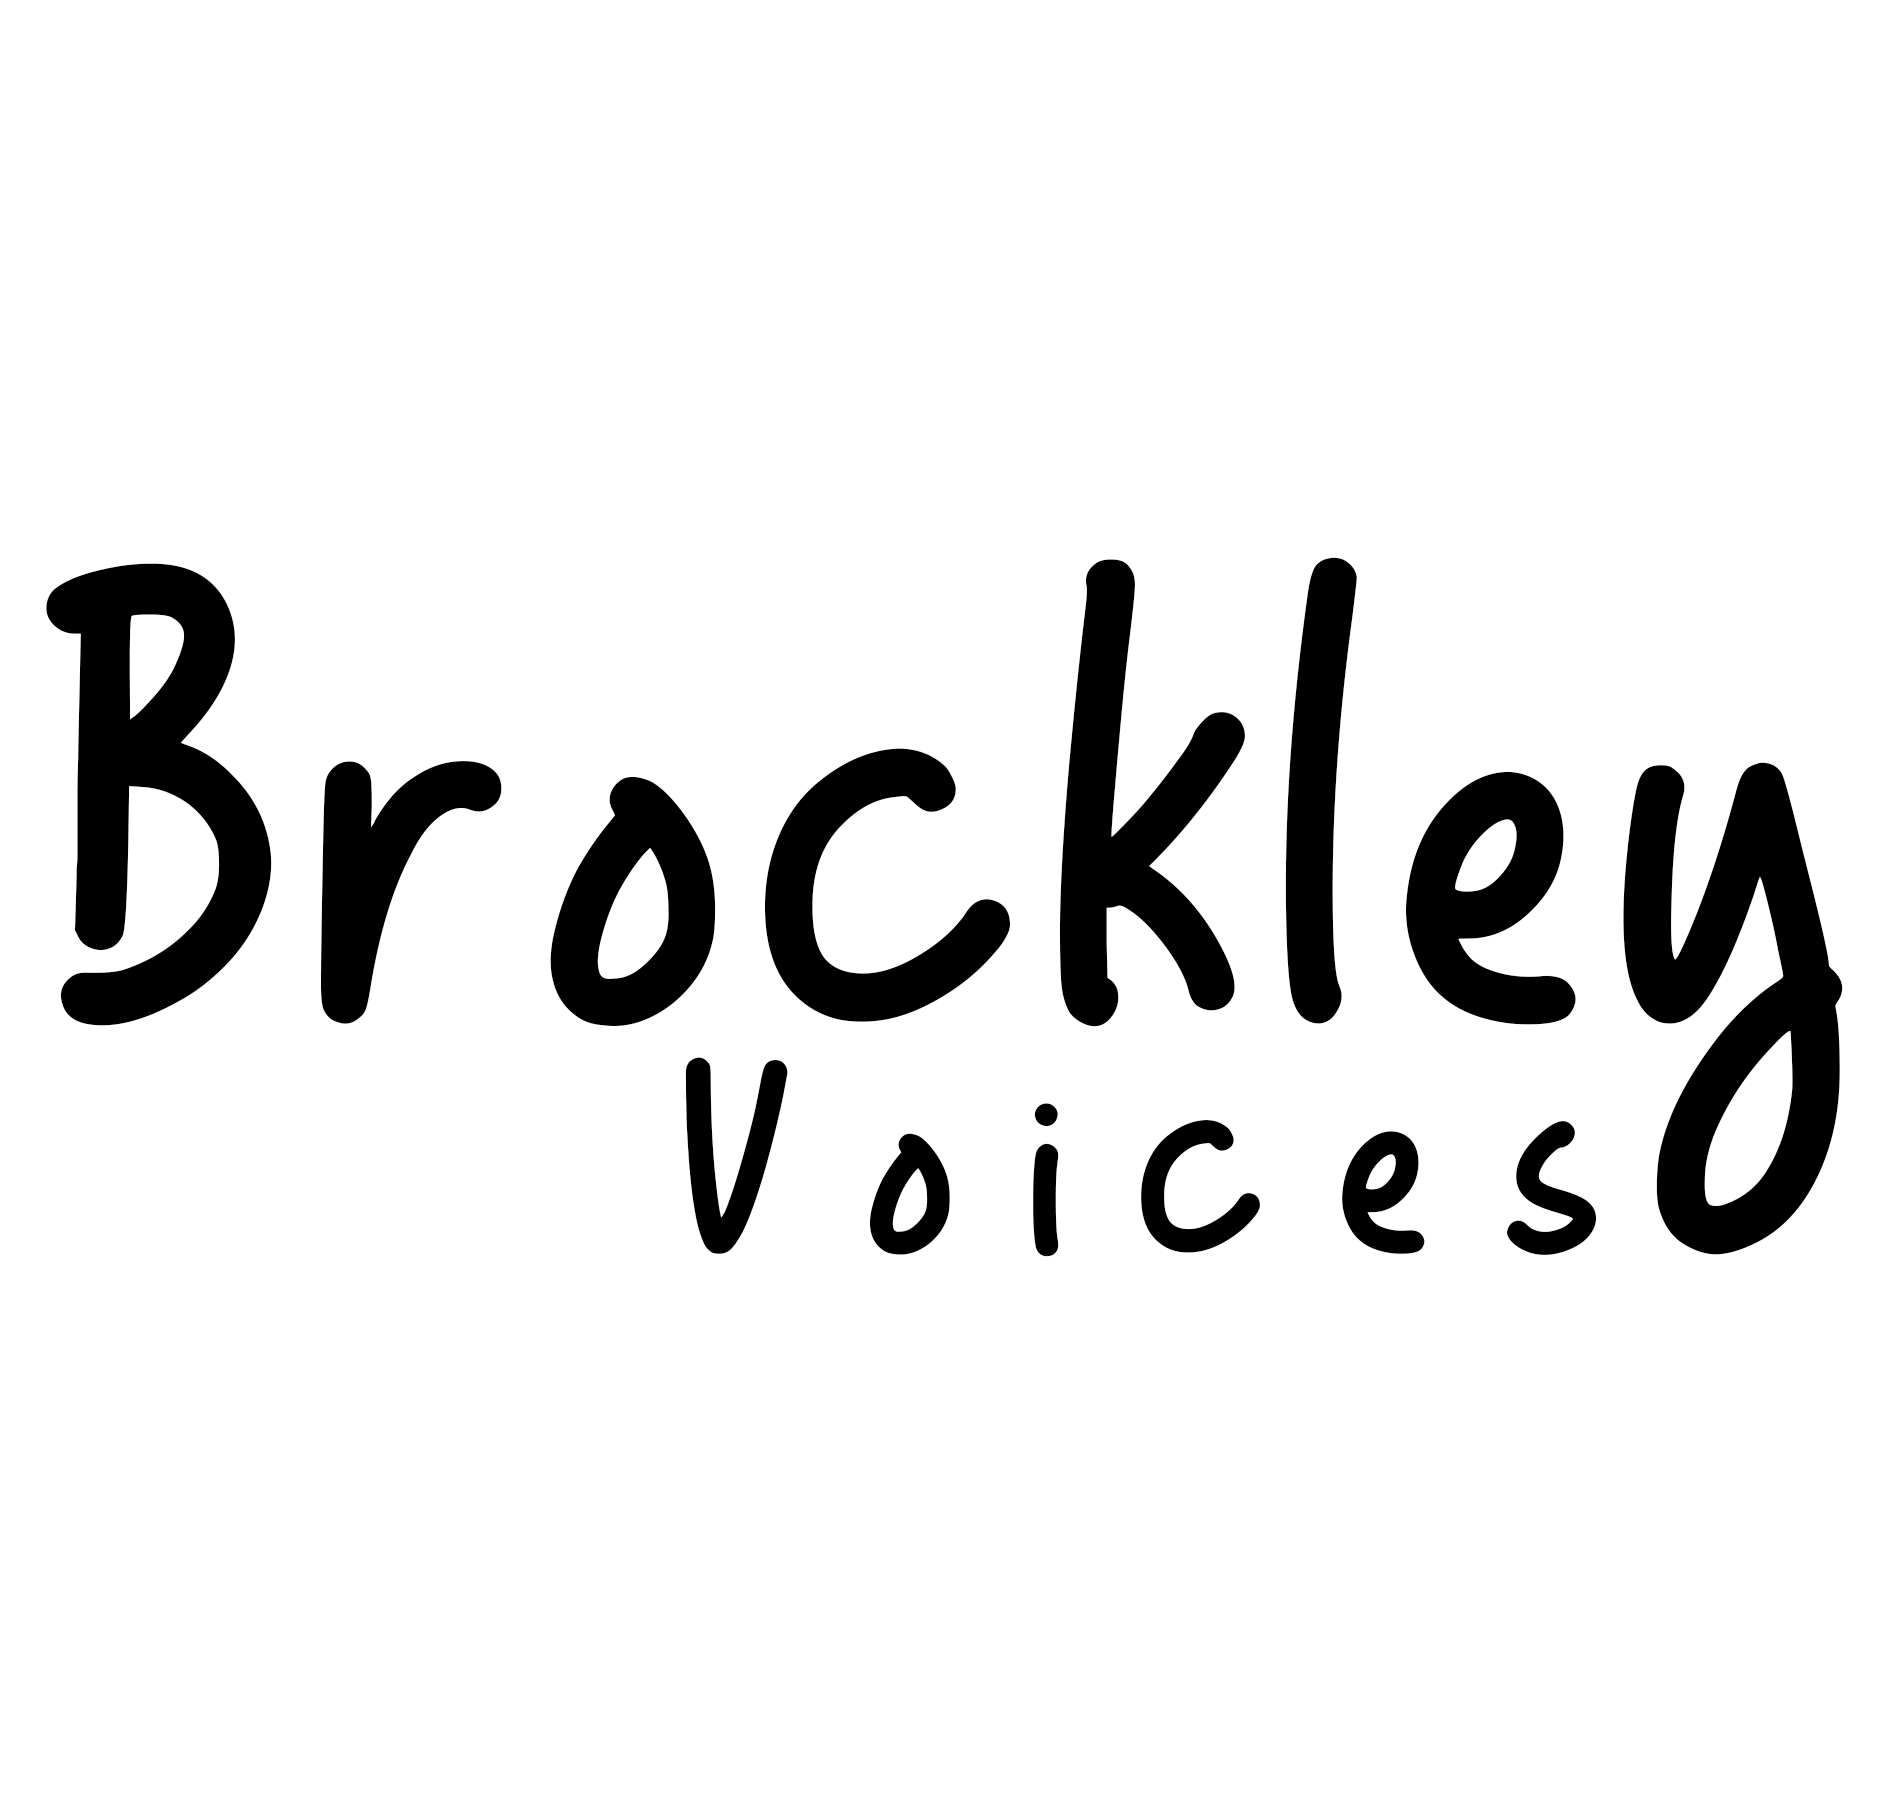 'Brockley' with a smaller font 'Voices' underneath. Handwritten style.